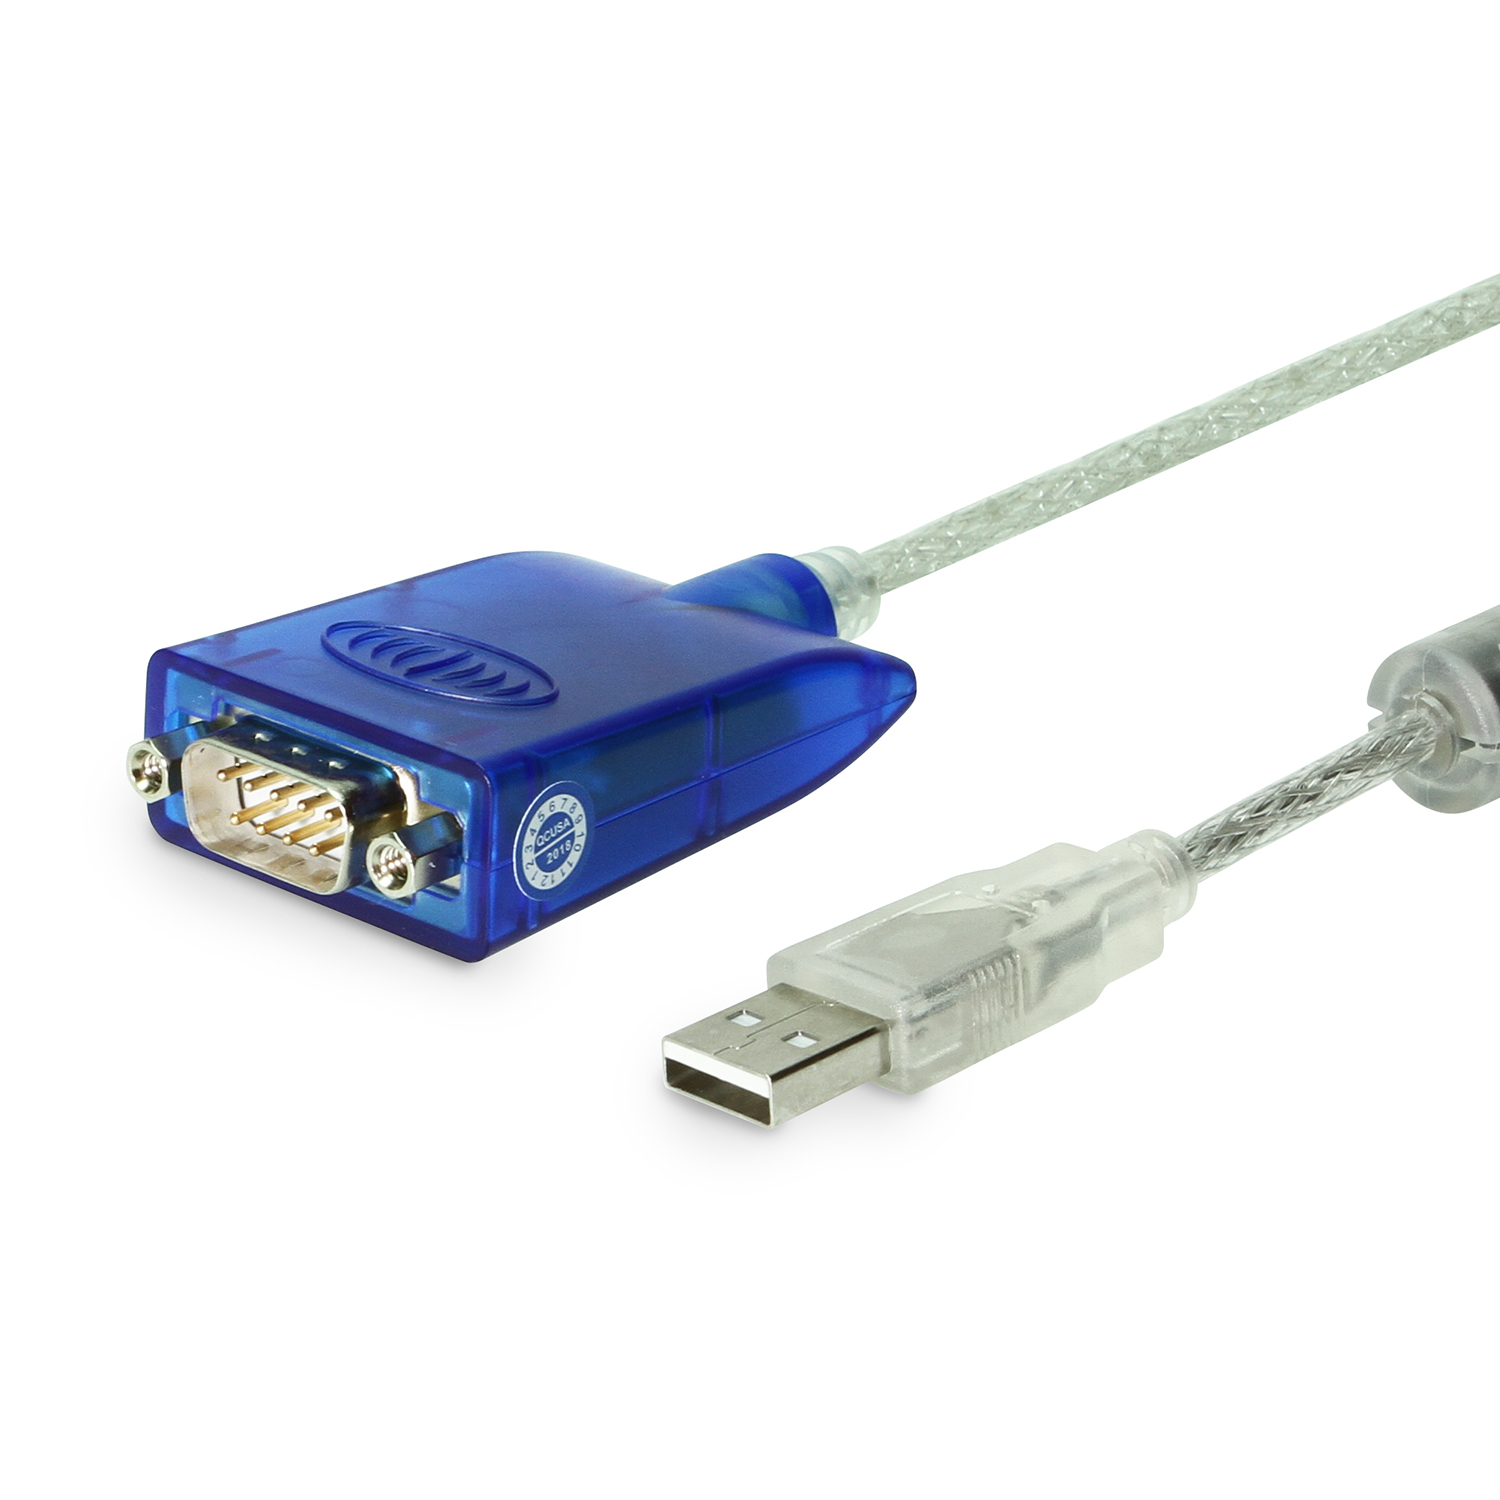 PRO Single Port USB to Serial Adapter with